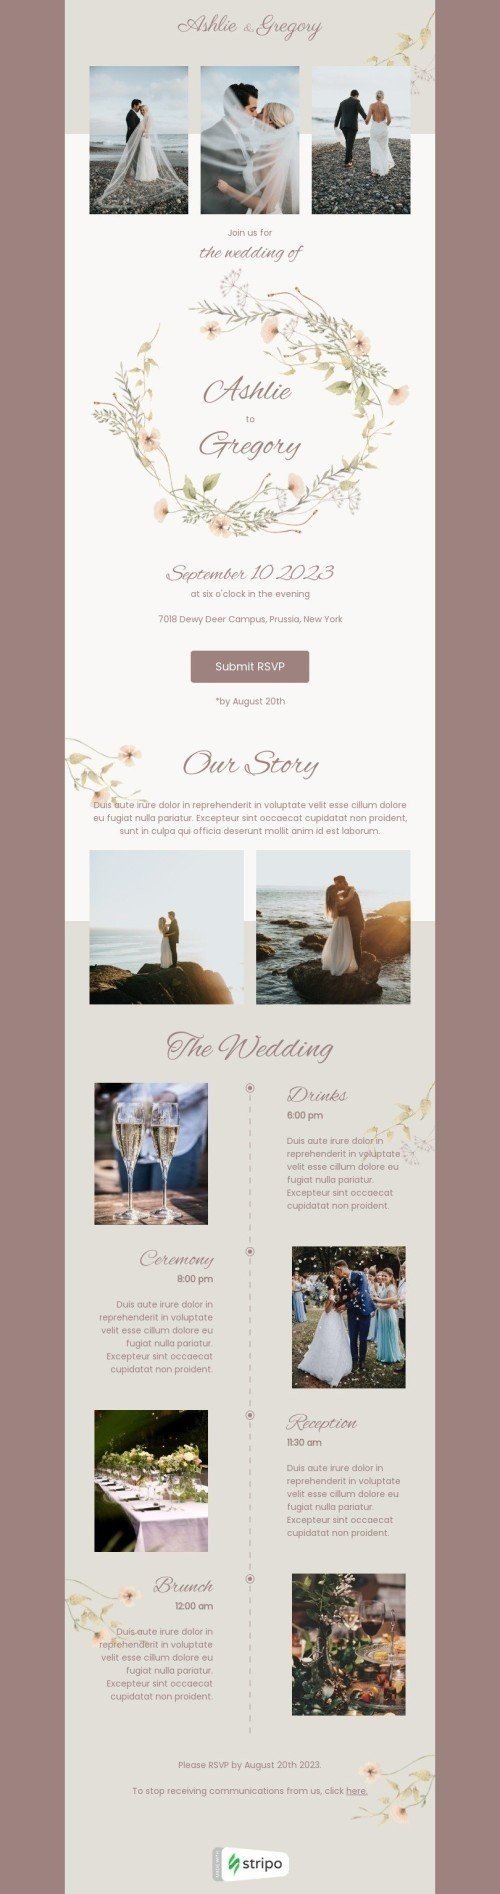 Wedding Invitation Email Template "Join us for the wedding" for Hobbies industry desktop view